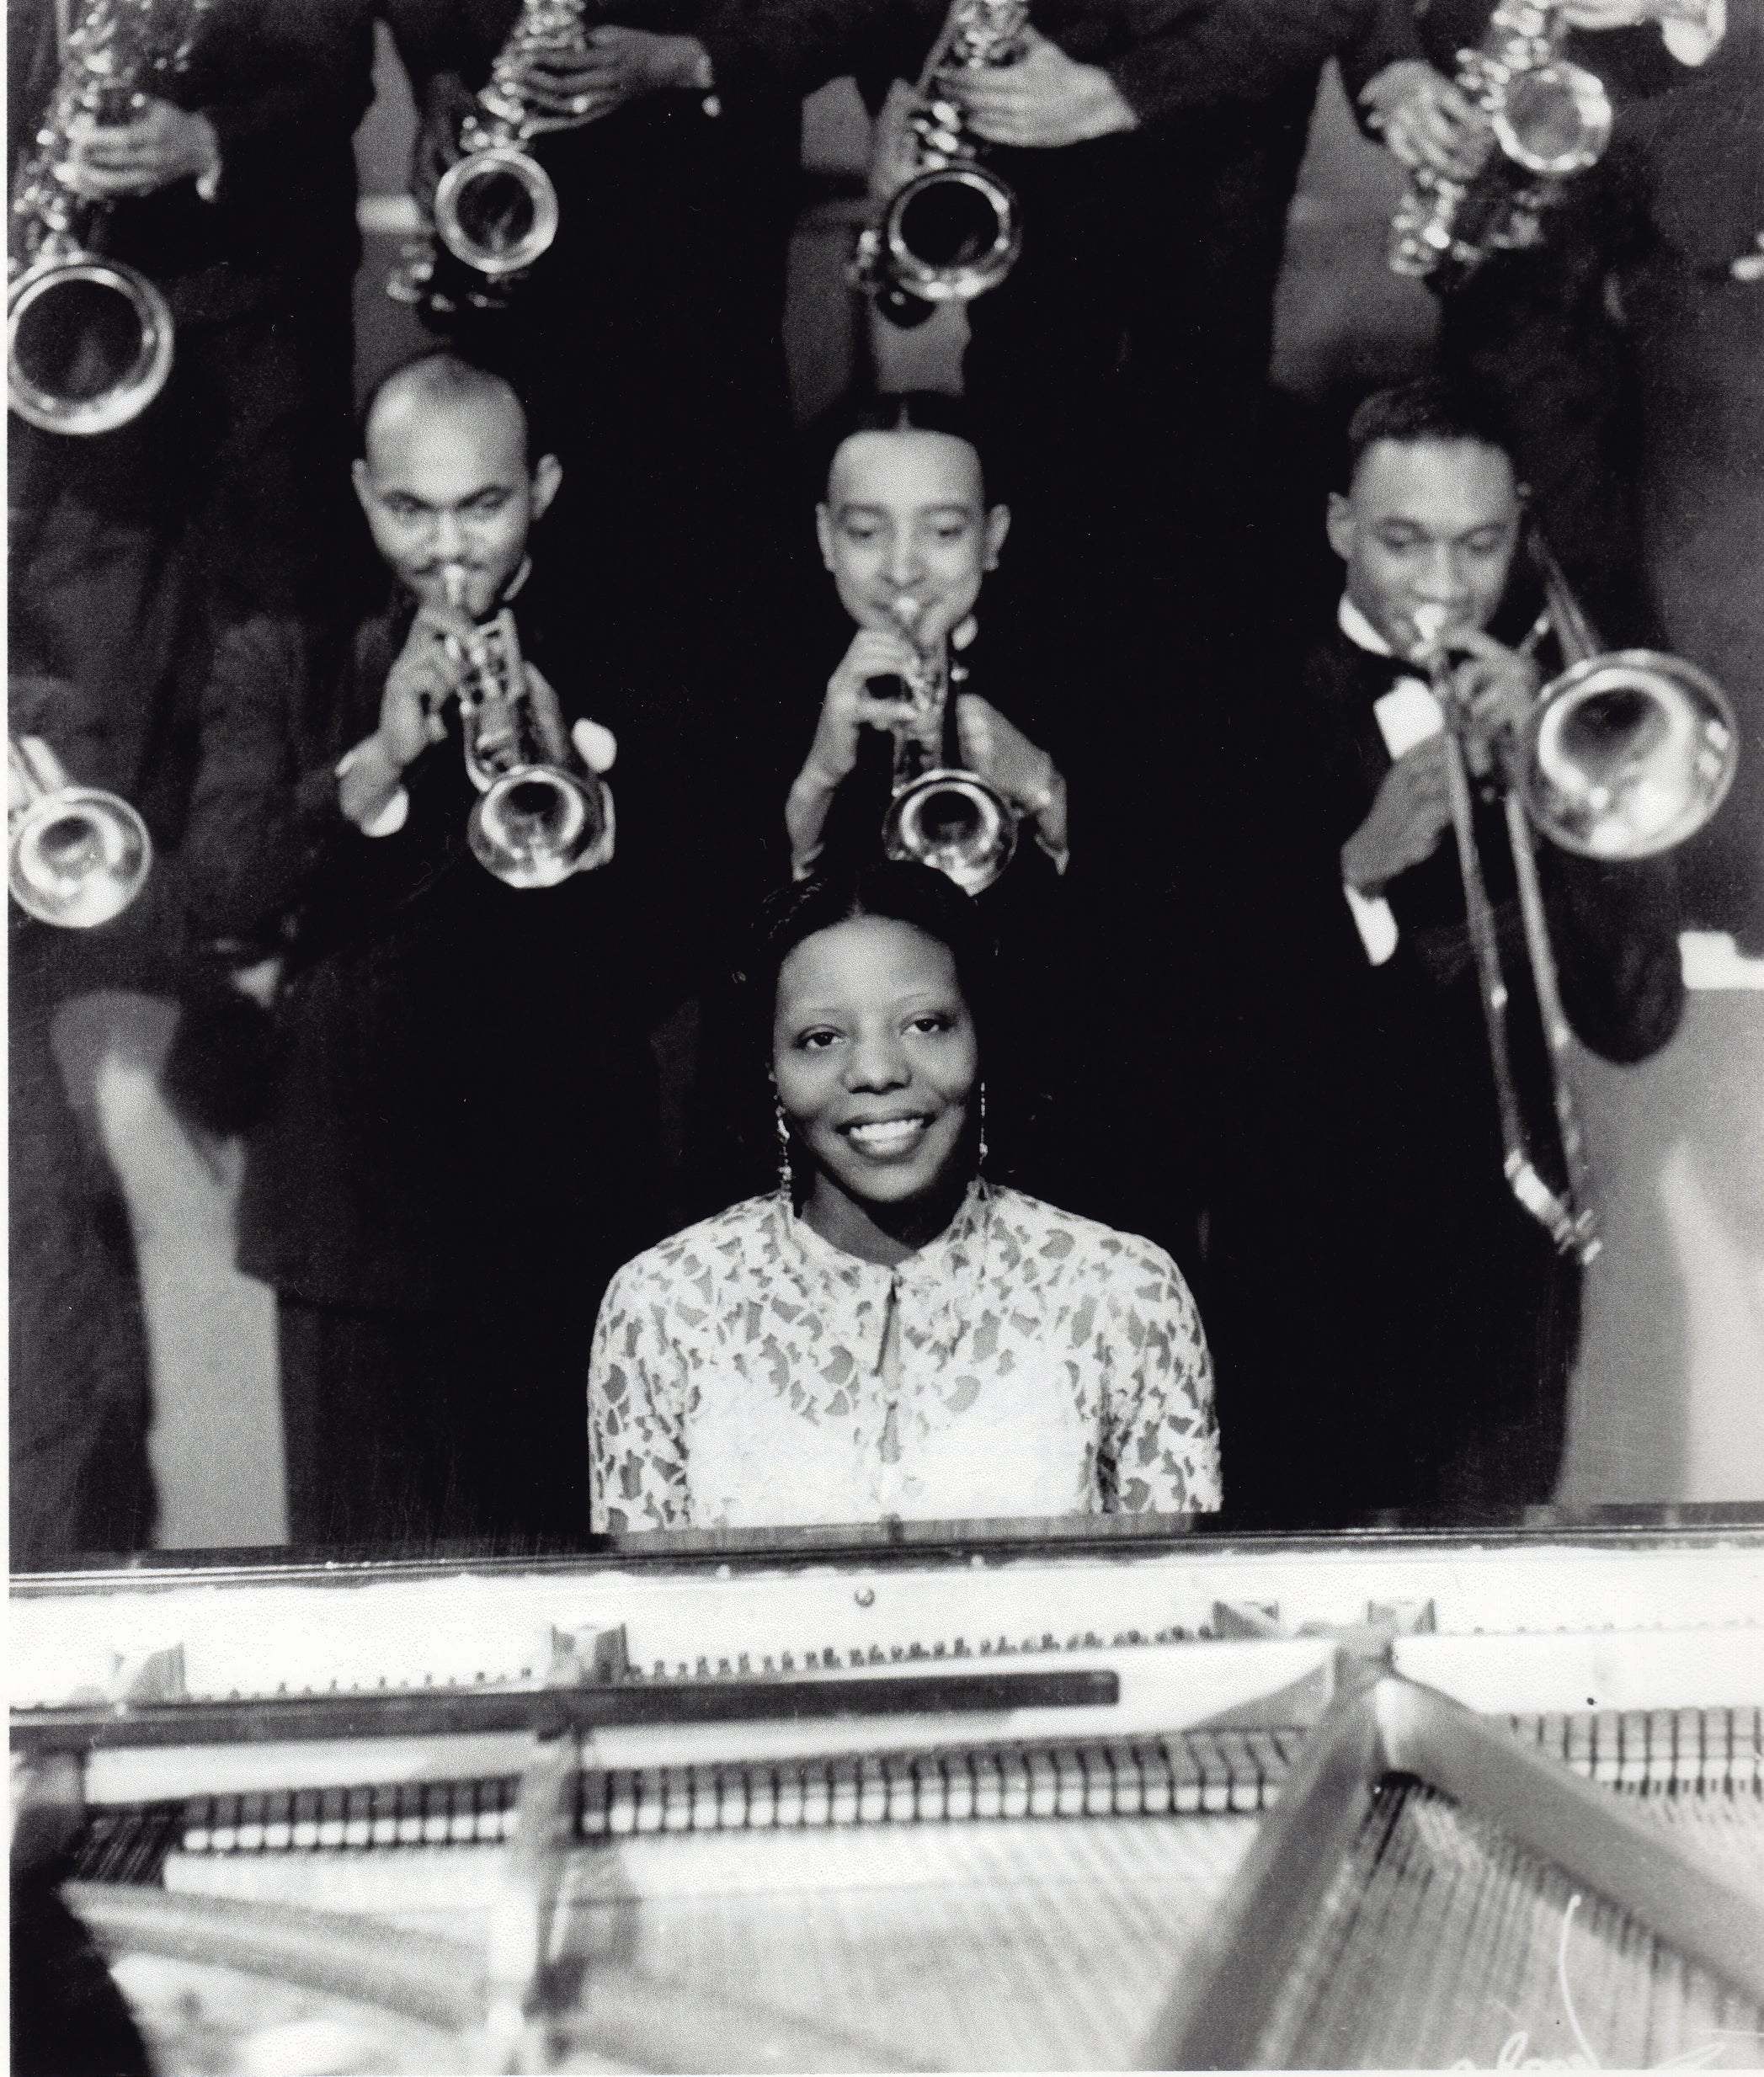 Music Pictures: New Orleans & Mary Lou Williams, The Lady Who Swings the Band